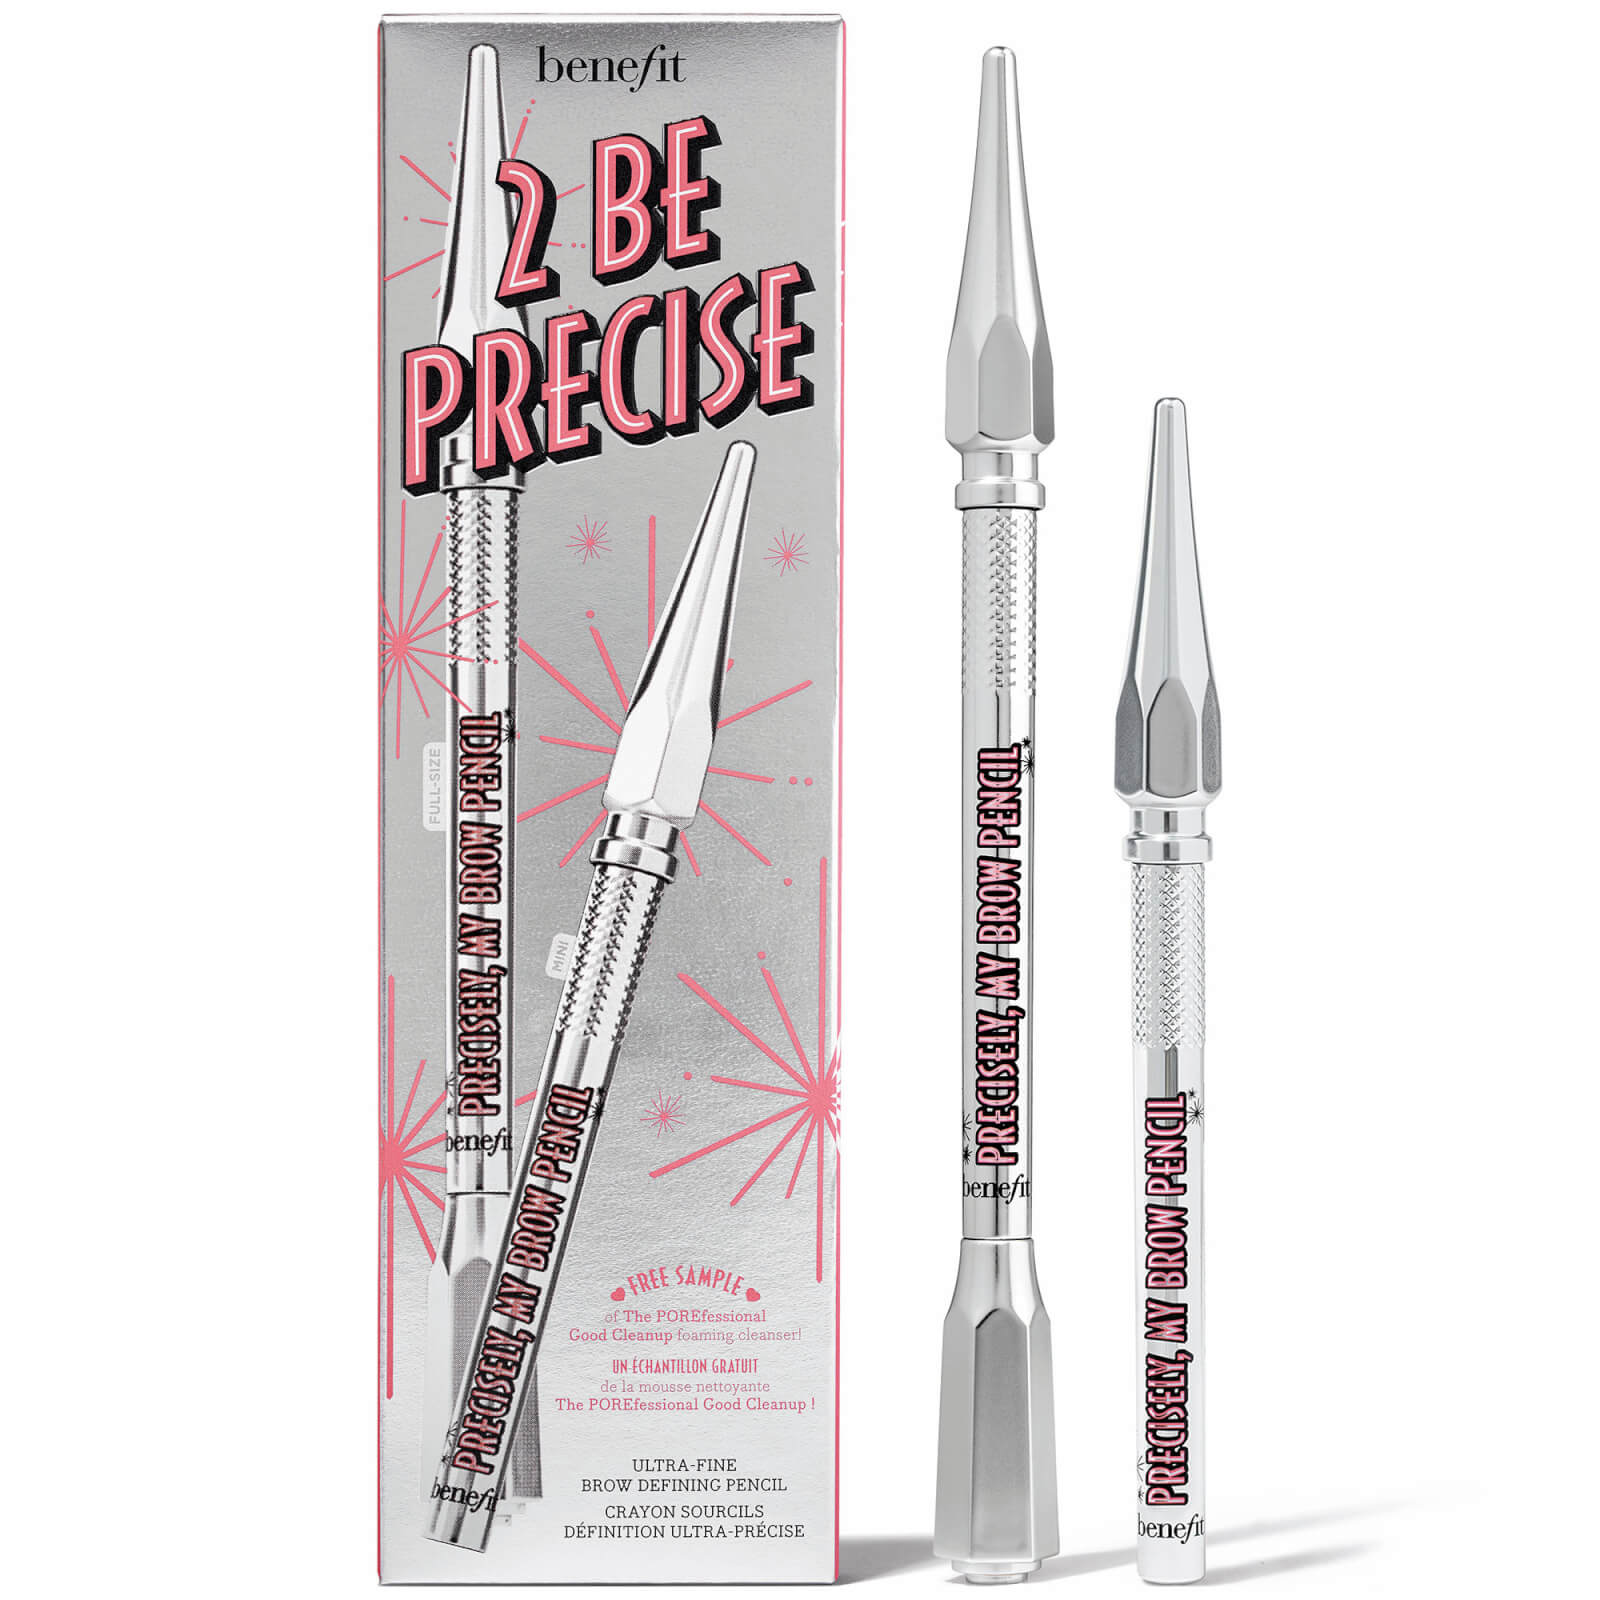 Benefit 2 Be Precise - Precisely My Brow Ultra Fine Eyebrow Defining Duo Set ( Various Shades) - Sha In Shade 2 Warm Golden Blonde